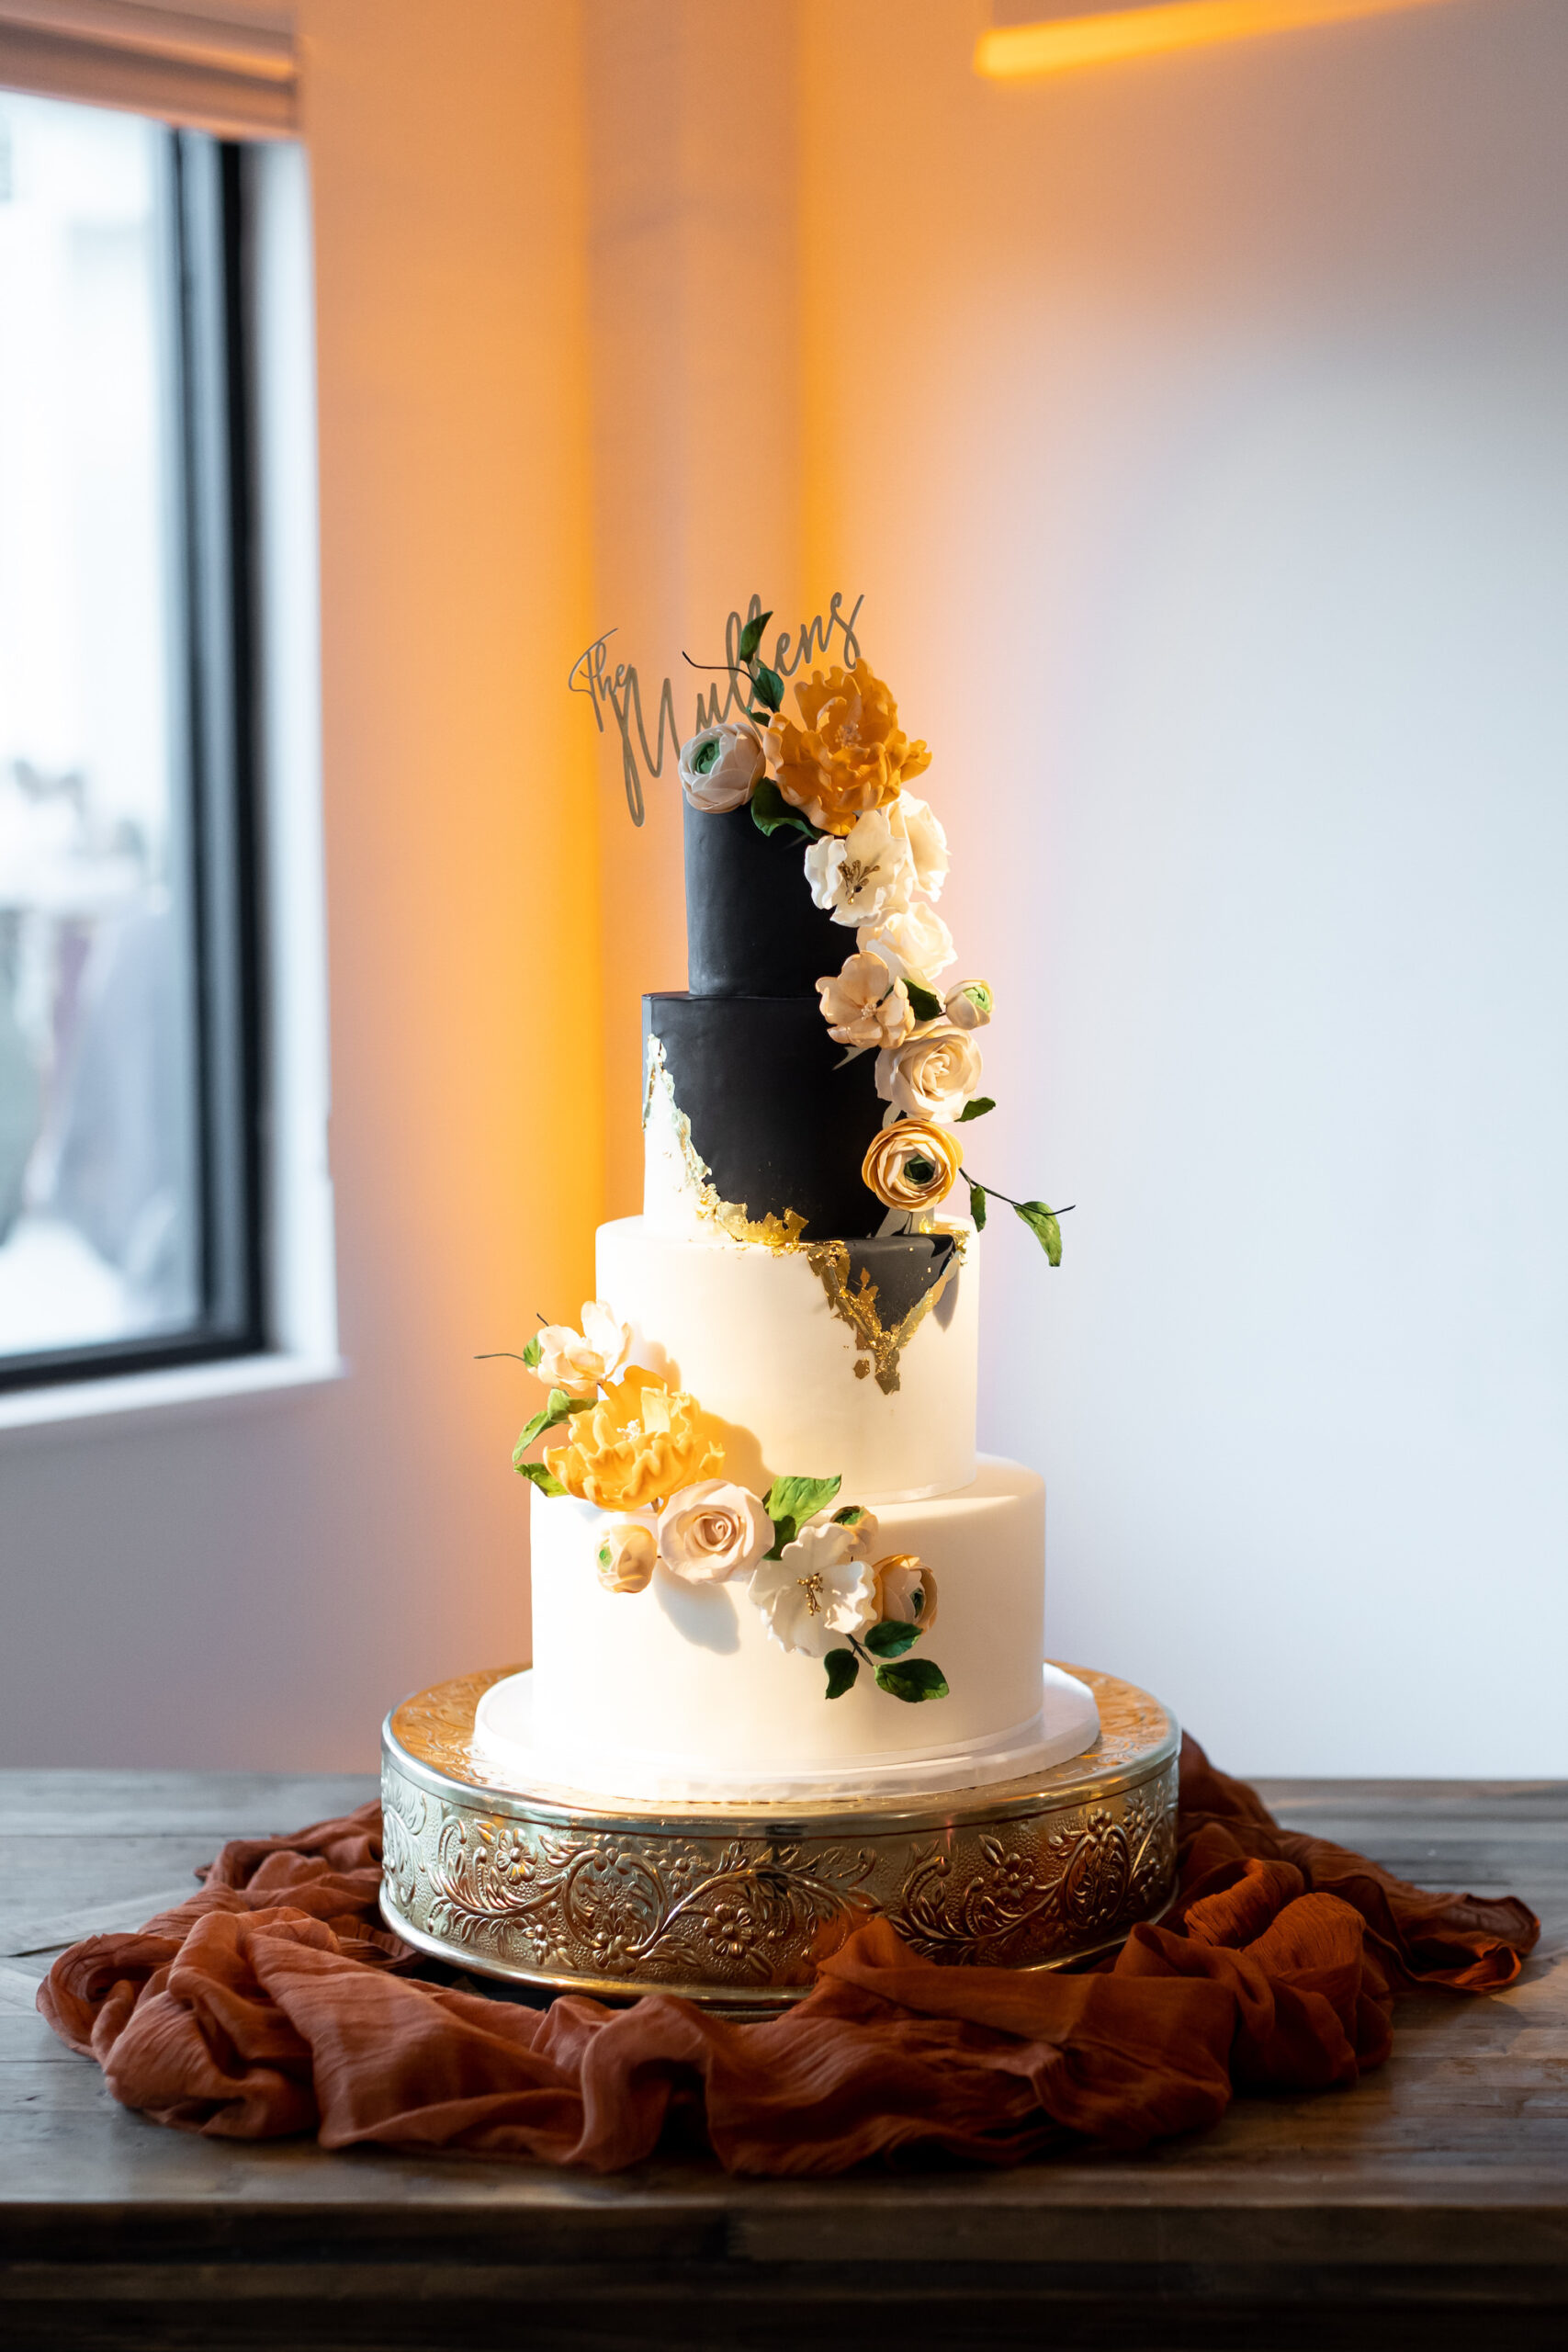 Modern Four-Tiered Black, White, and Gold Wedding Cake On a Gold Cake Stand | Tampa Bay Wedding Cake Tampa Bay Cake Company